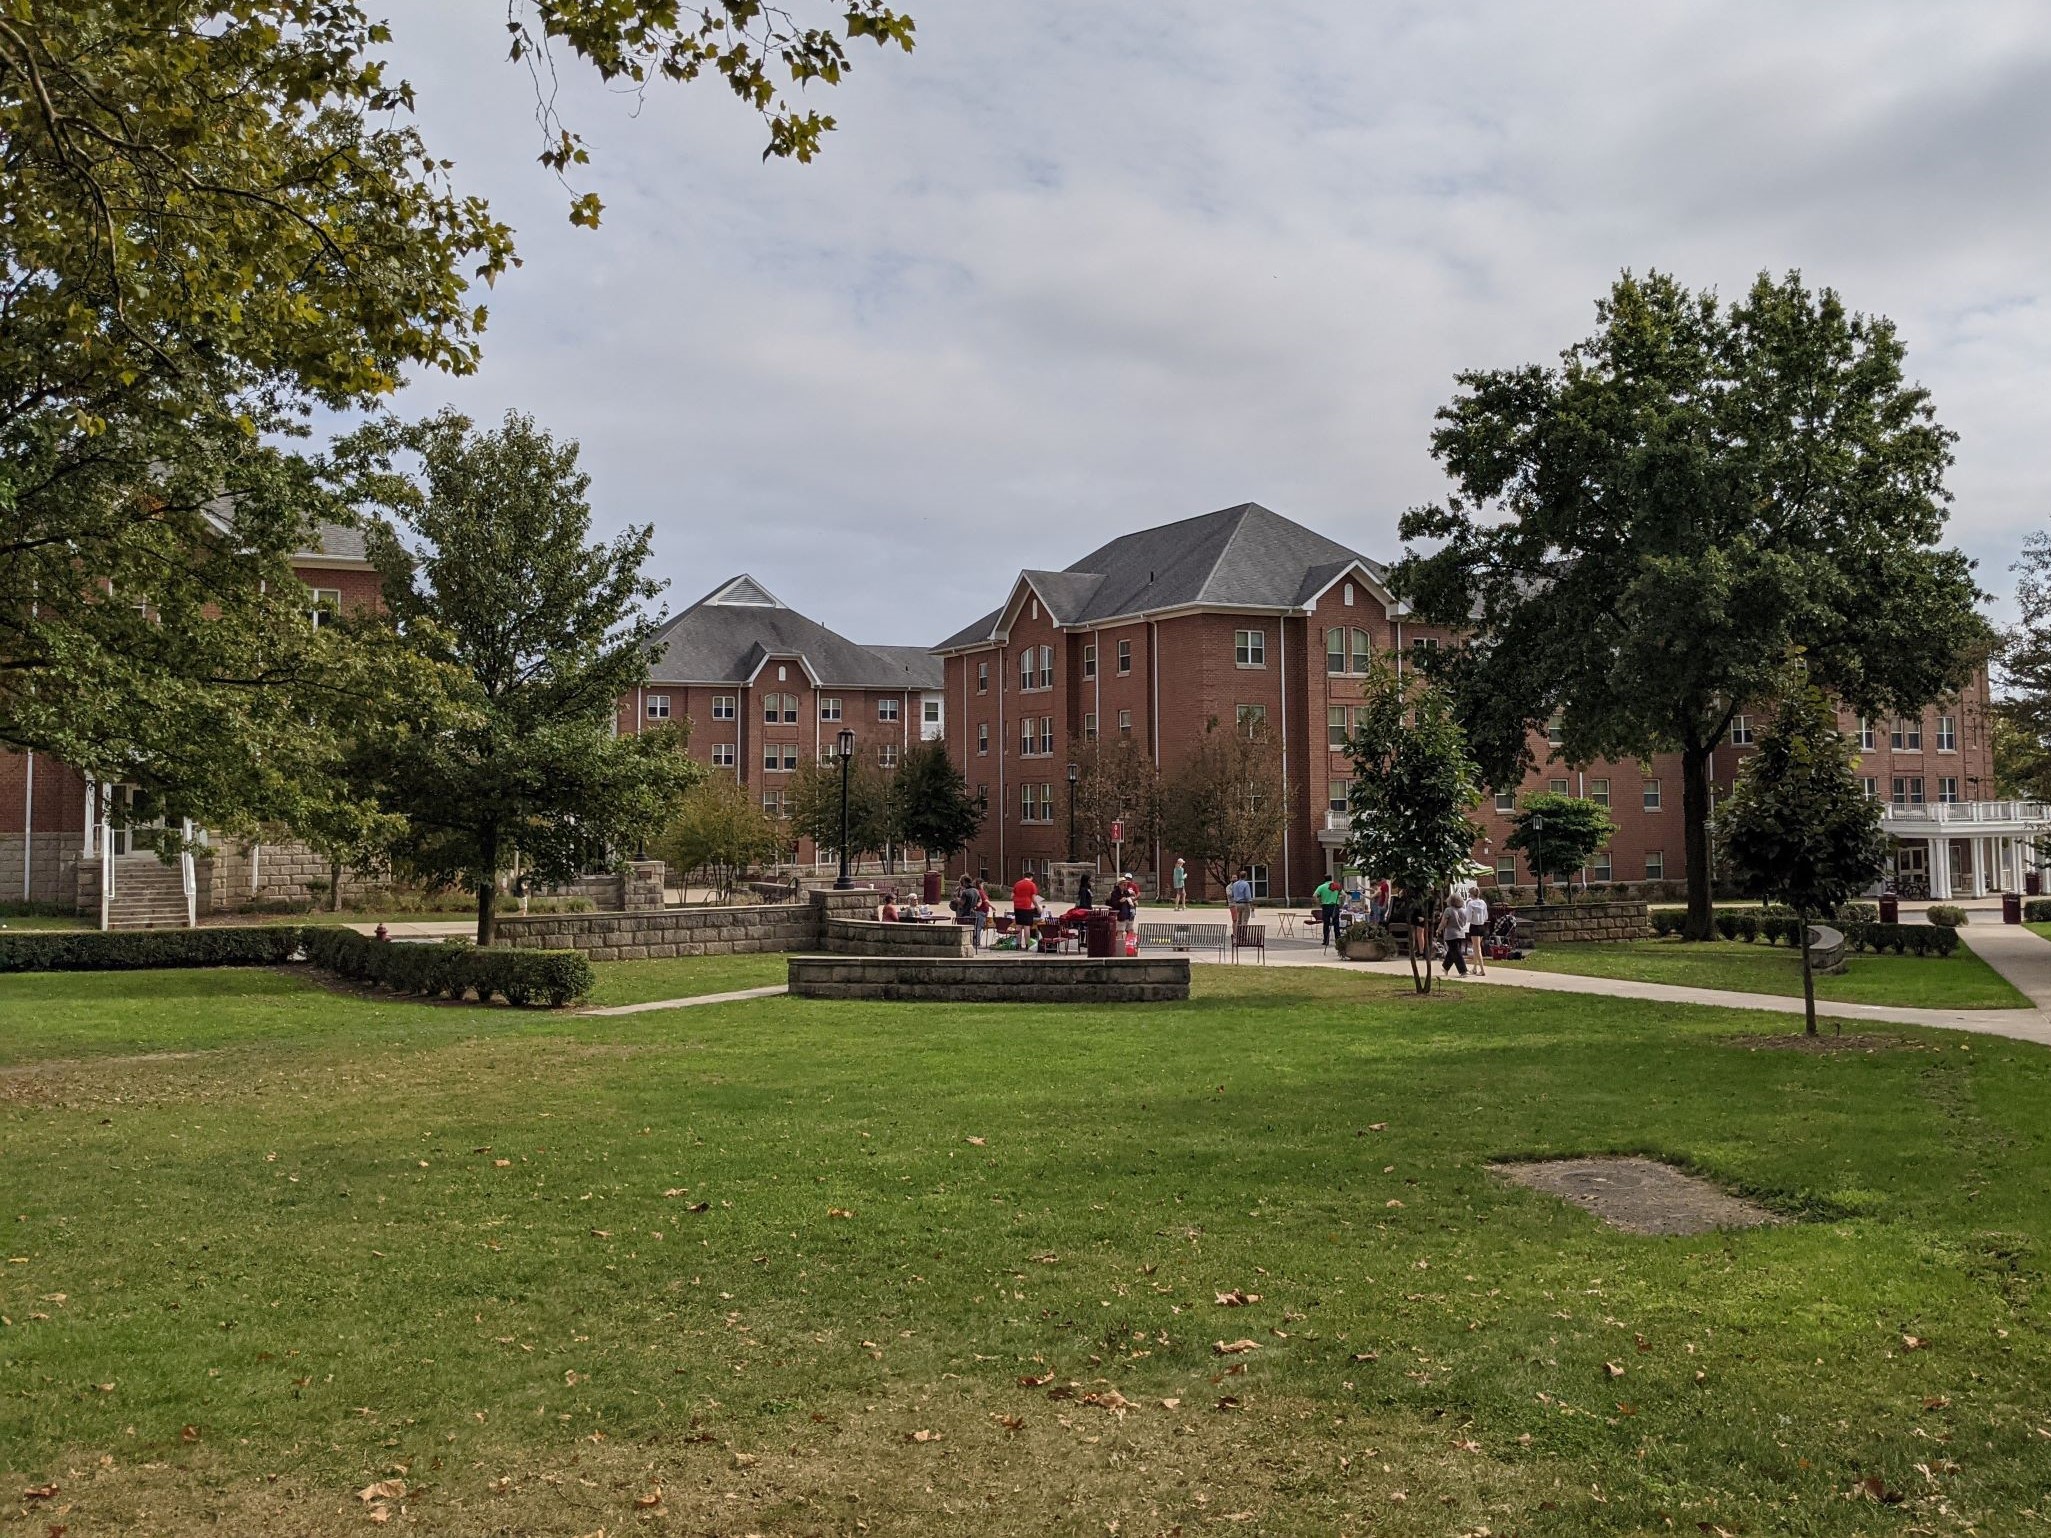 Large campus green with students gathered in plaza with Historical looking pink brick residence hall with many gabled roofs, white front porch and trim, truncated dormer windows and brick quoining, very classical looking student housing building in background